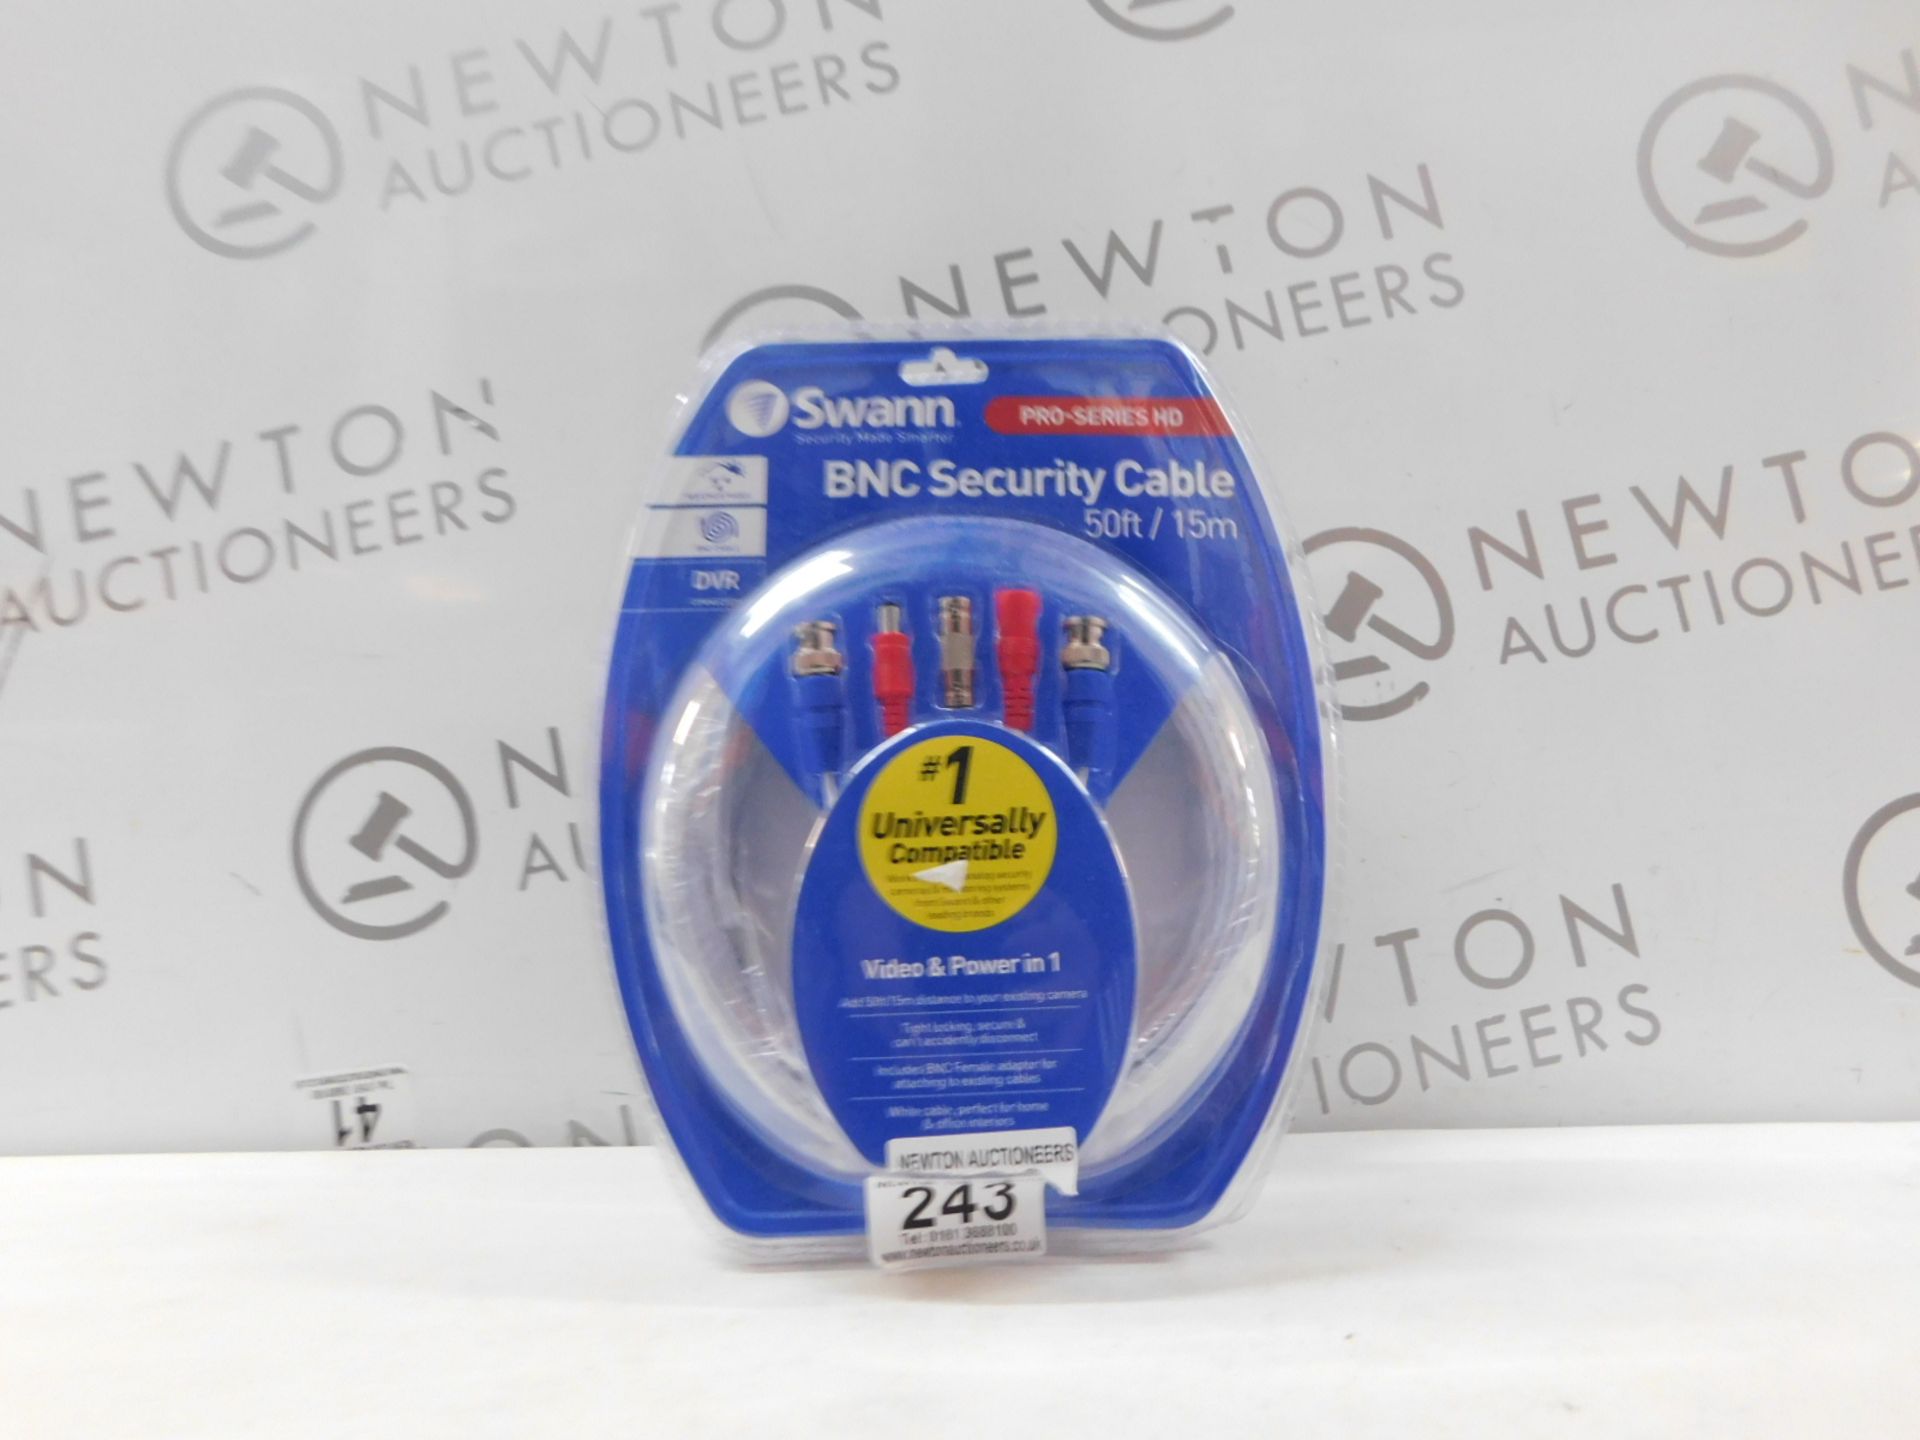 1 PACKED SWANN HD VIDEO & POWER 50FT / 15M BNC CABLE RRP Â£24.99